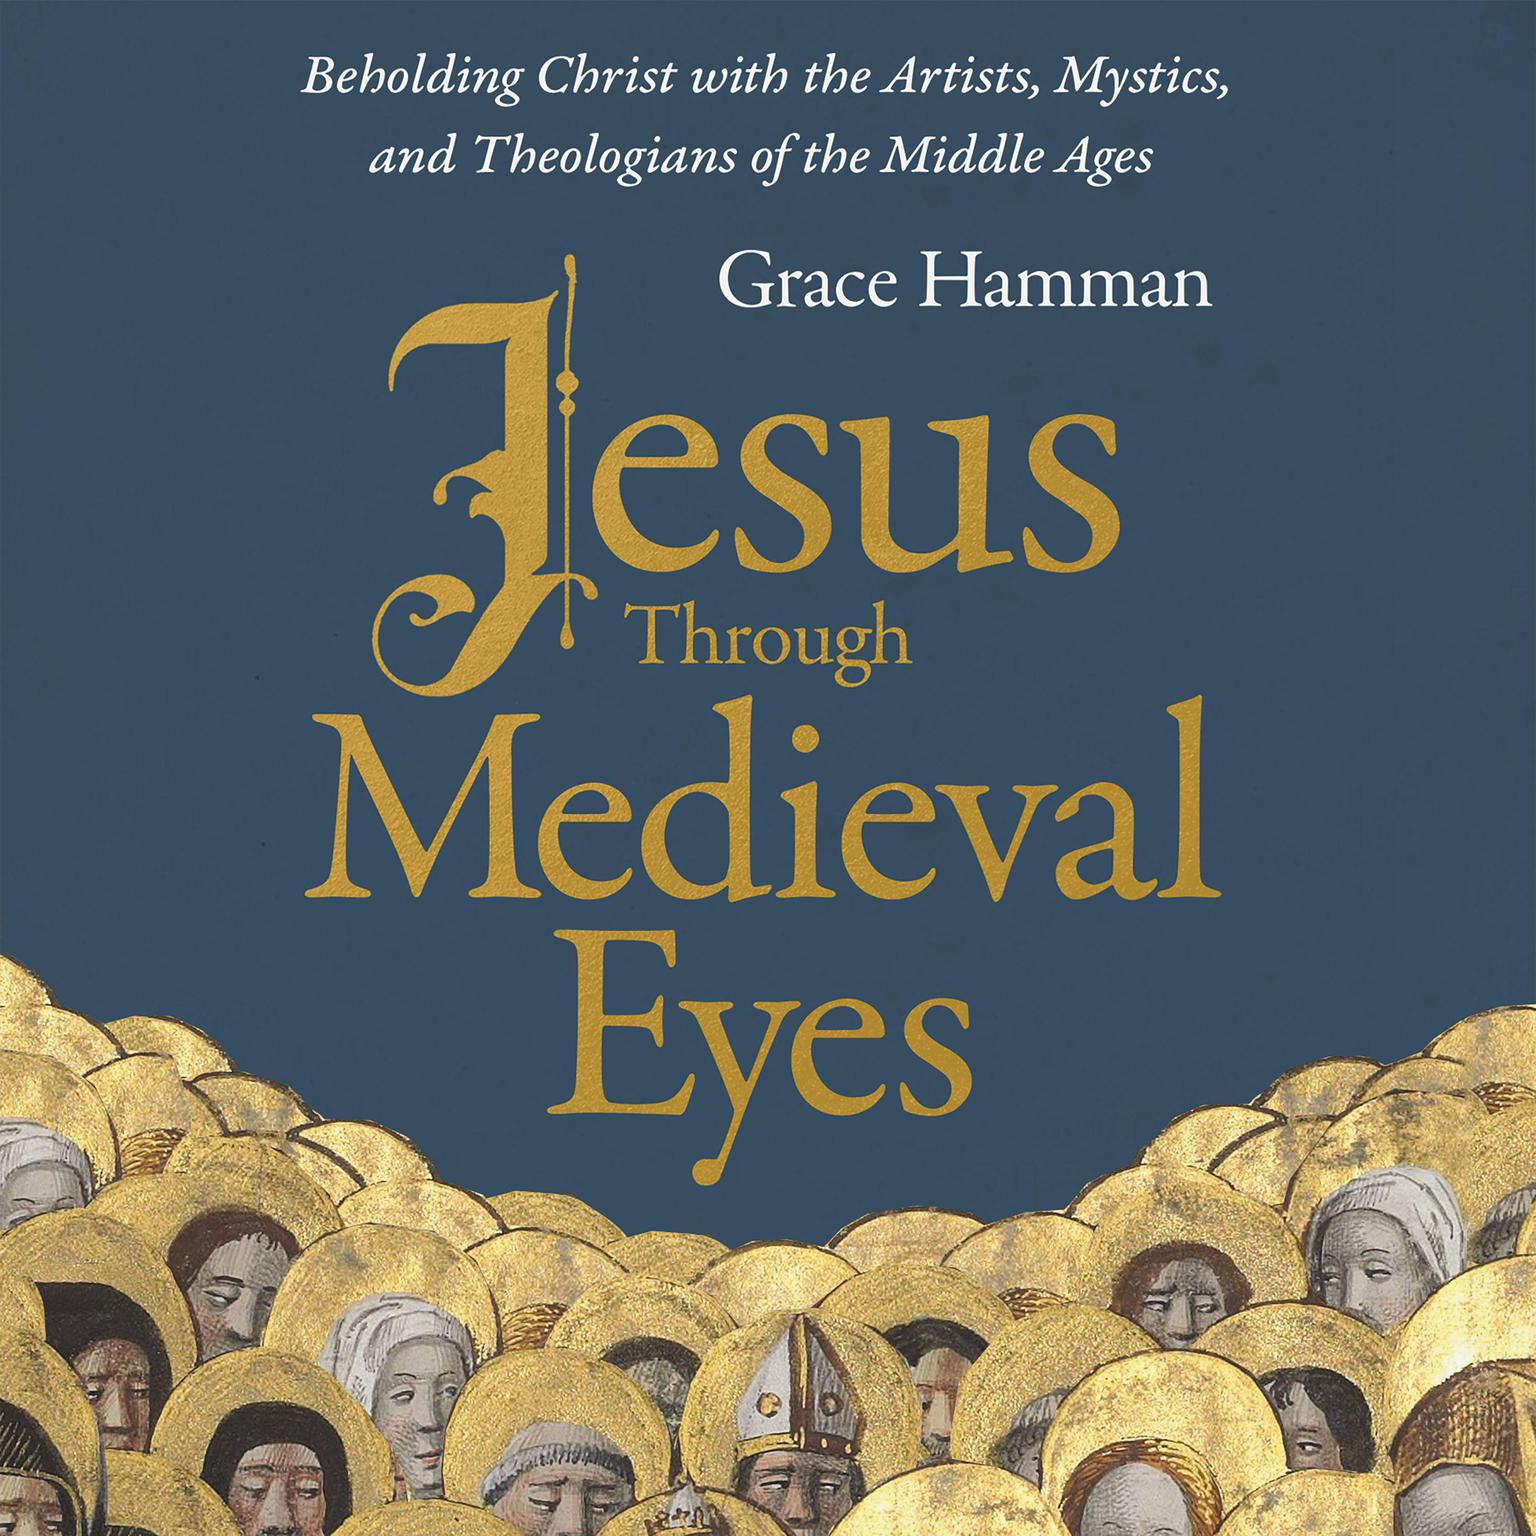 Jesus through Medieval Eyes: Beholding Christ with the Artists, Mystics, and Theologians of the Middle Ages Audiobook, by Grace Hamman